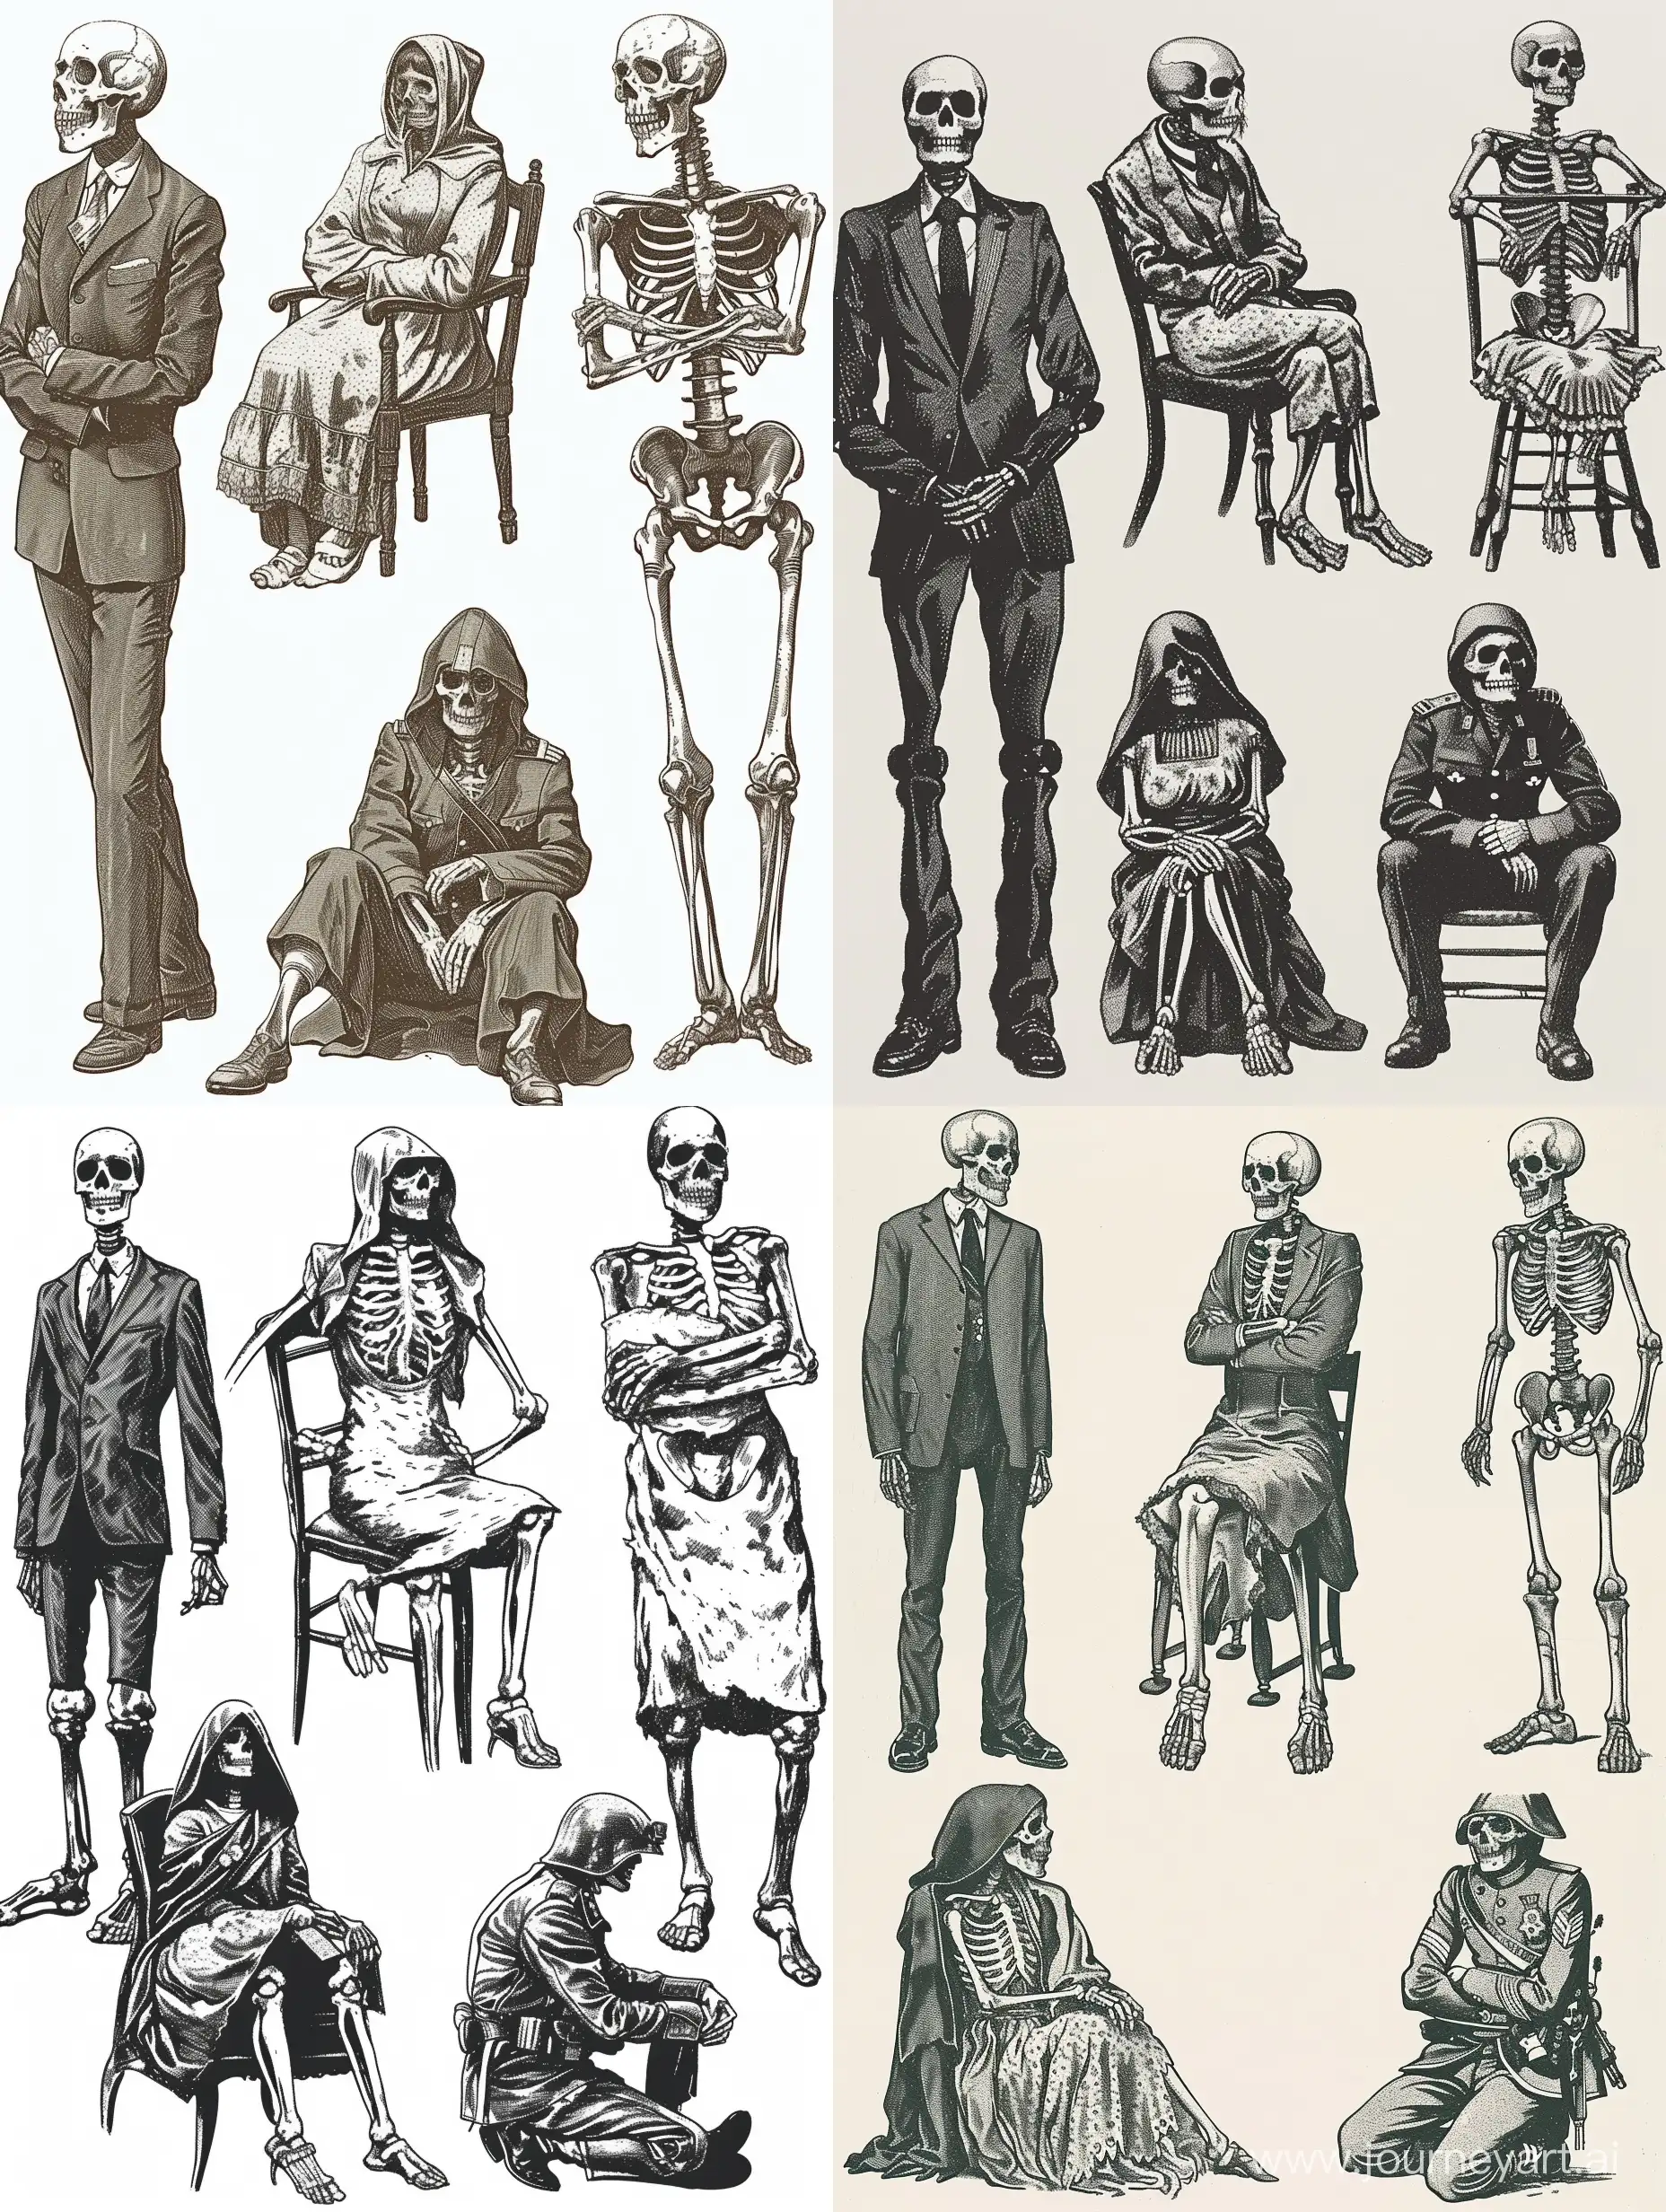 The skeletons are all wearing different outfits and are posed in different ways.  The first skeleton is wearing a suit and tie and is standing upright with its arms at its sides. The second skeleton is wearing a dress and is sitting in a chair. The third skeleton is wearing a hooded robe and is standing with its arms crossed. The fourth skeleton is wearing a military uniform and is kneeling on one knee with its head bowed.